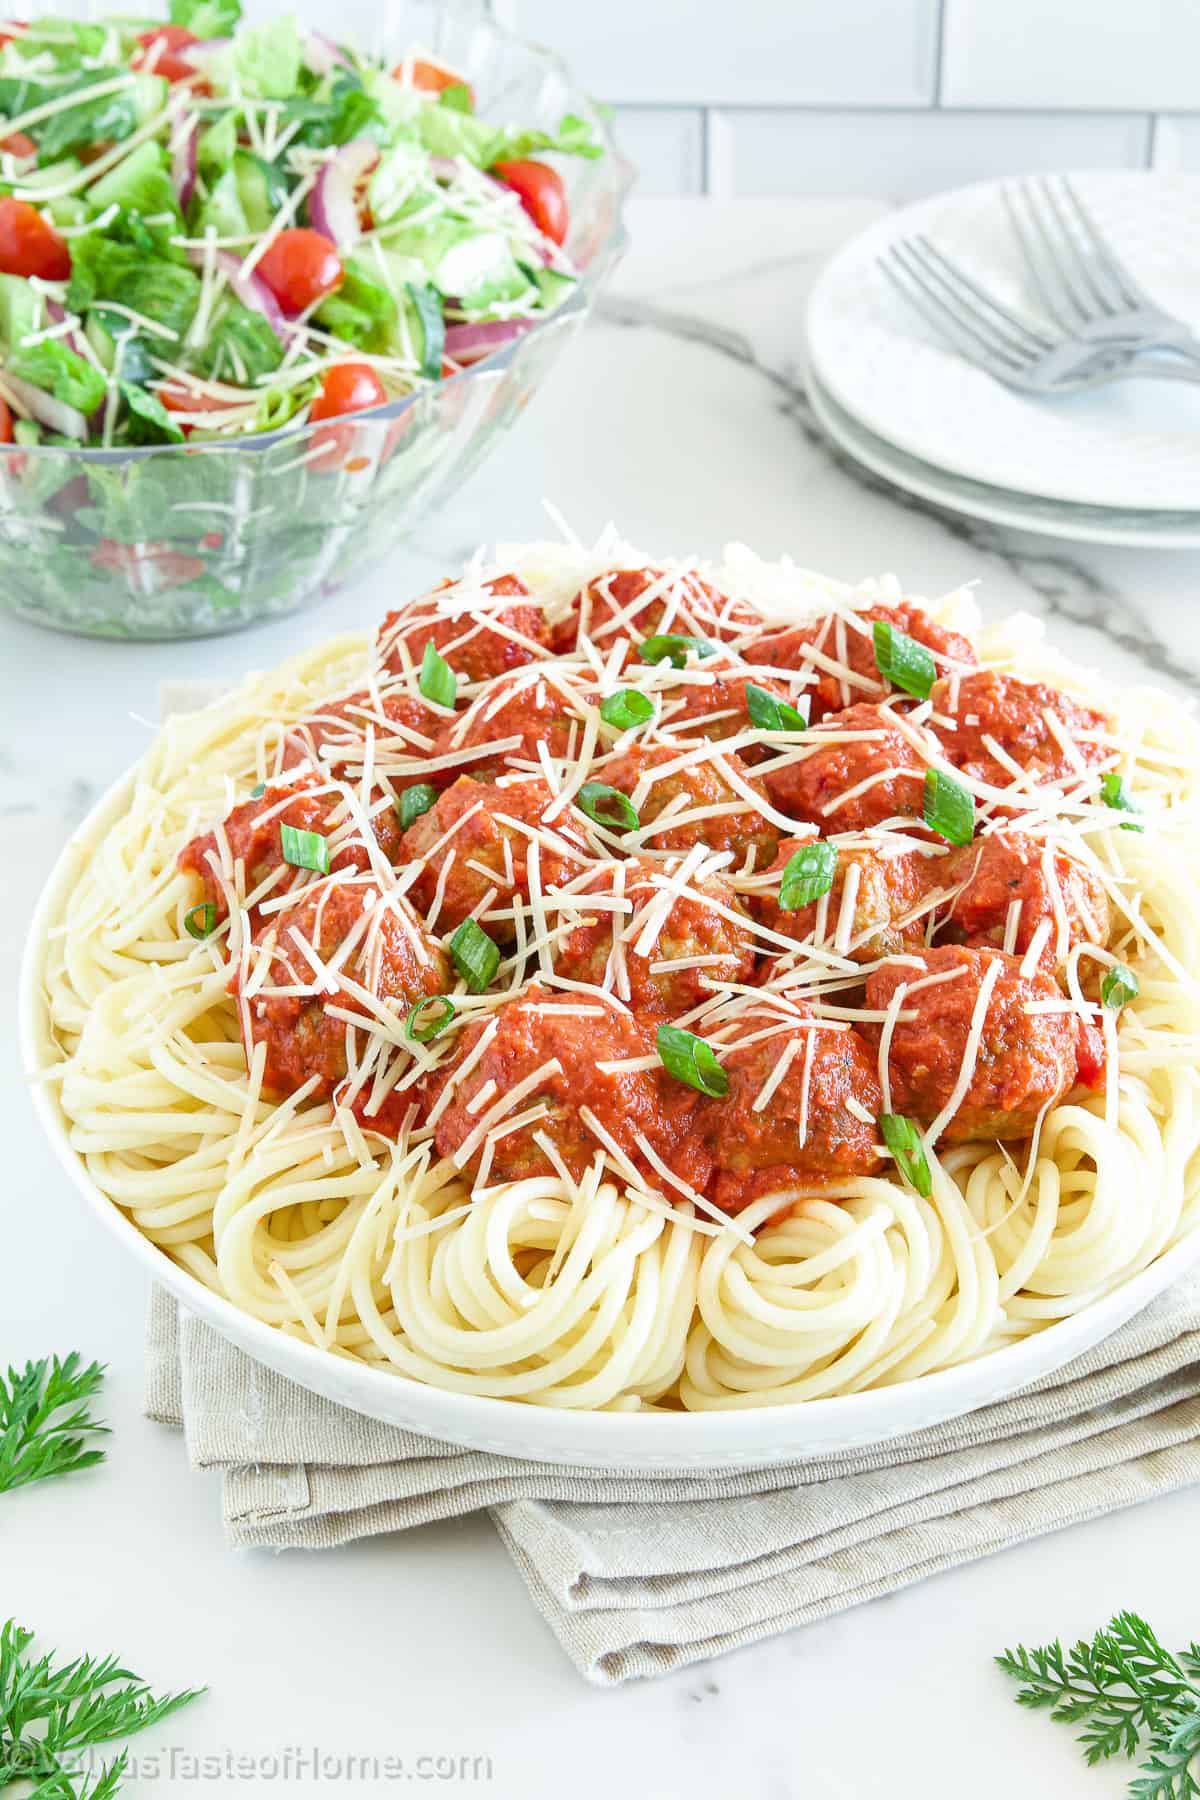 There’s hardly ever a dish as comforting and delicious as Spaghetti and Meatballs, and my recipe is going to give you the tastiest ones you’ve ever had!